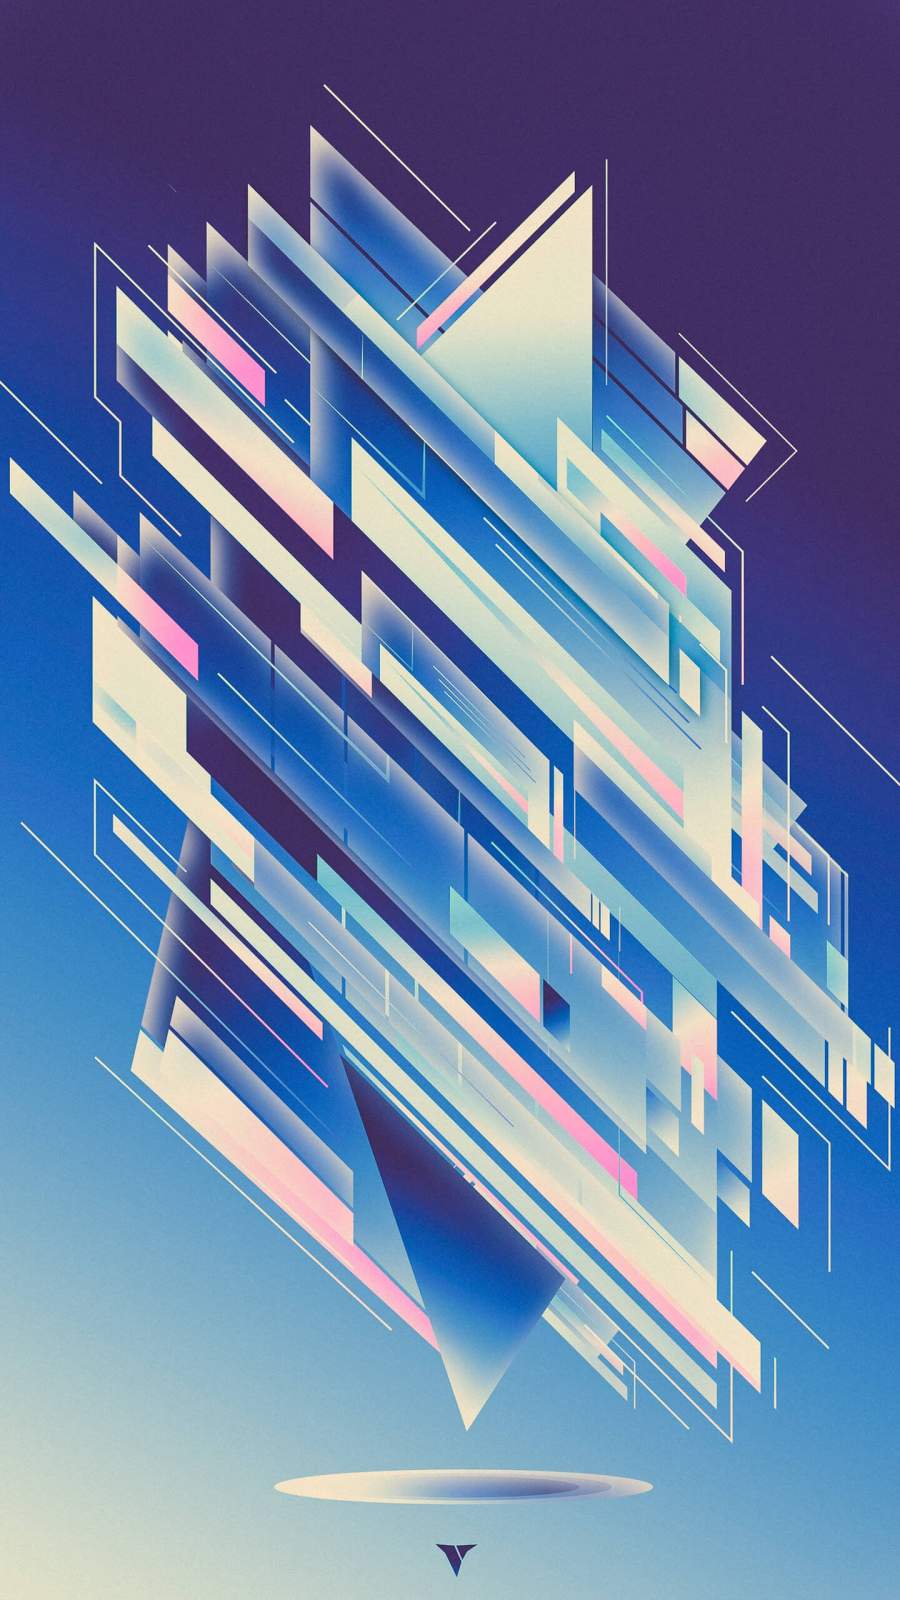 Abstract Design iPhone Wallpaper - iPhone Wallpapers